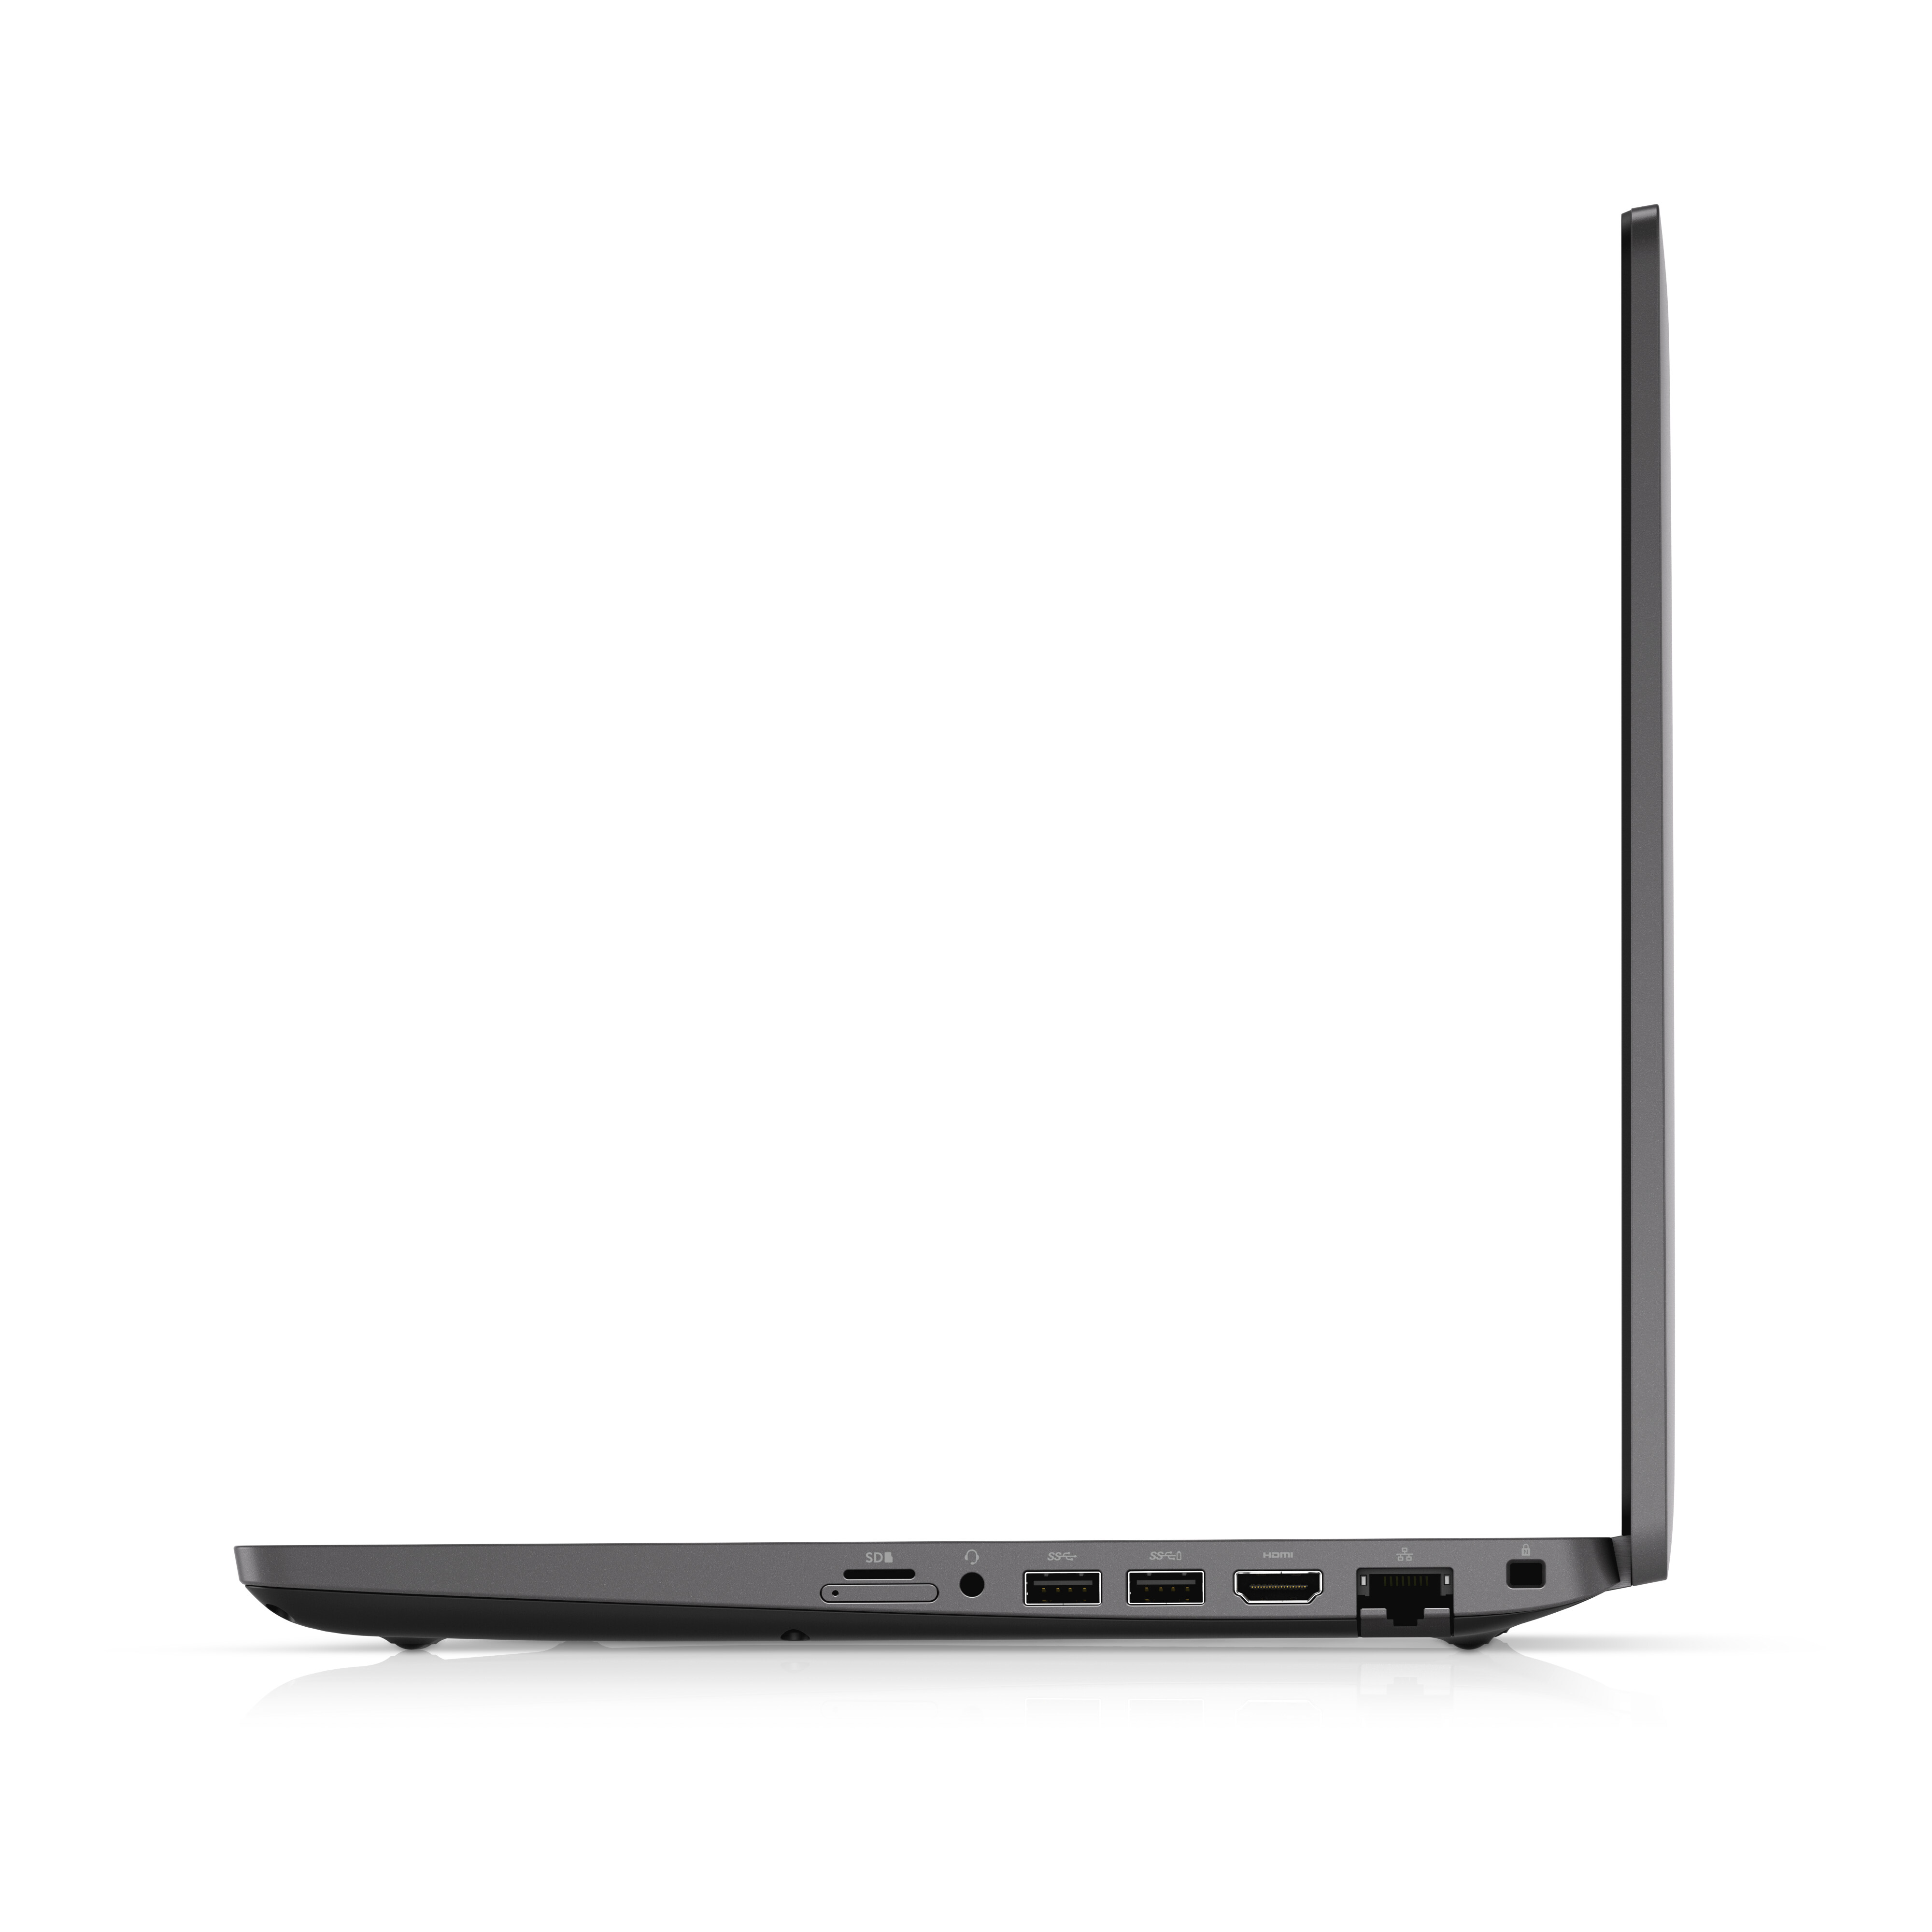 The Dell Precision 3540 and 3541 Mobile Workstations – Making